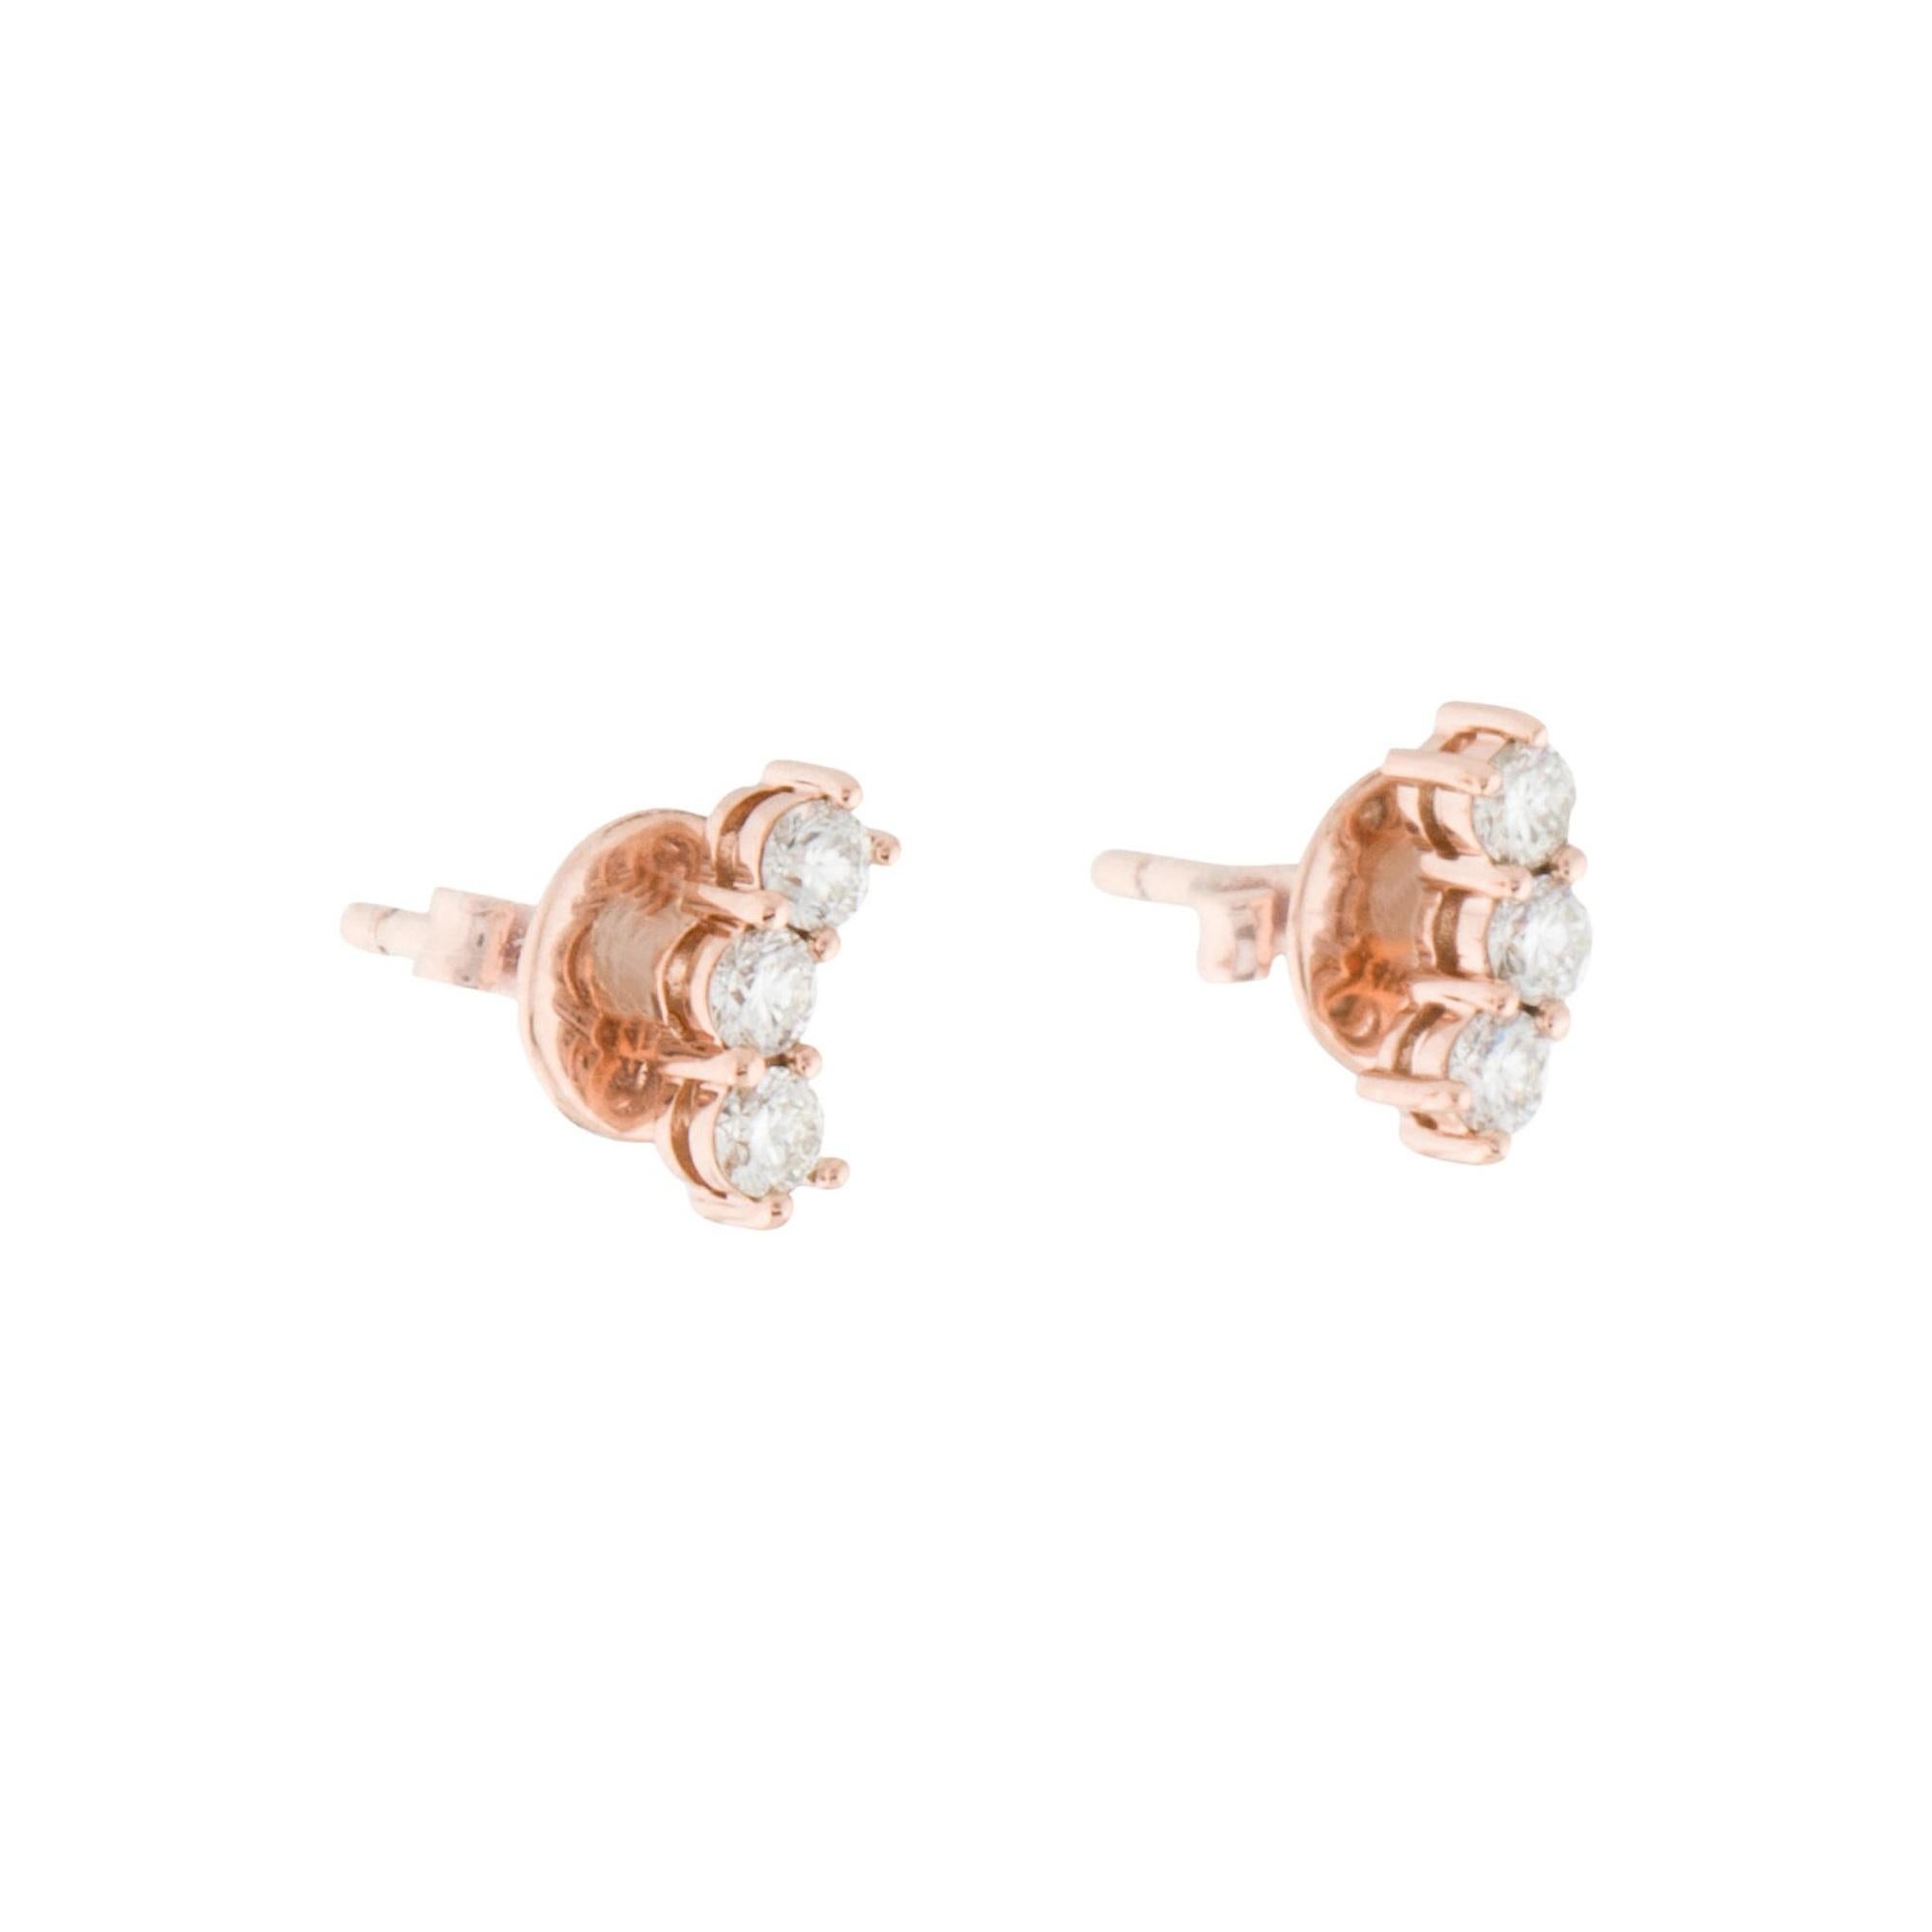 Let Stunning Sparkle Diamonds adorn your lobes!
Crafted of 14K Gold, these small and dainty Stud Earrings featuring approximately 0.30cts of White Round Natural Diamonds are a great look for everyday! Each Stud measures 1/4 of an inch. 
-14K 